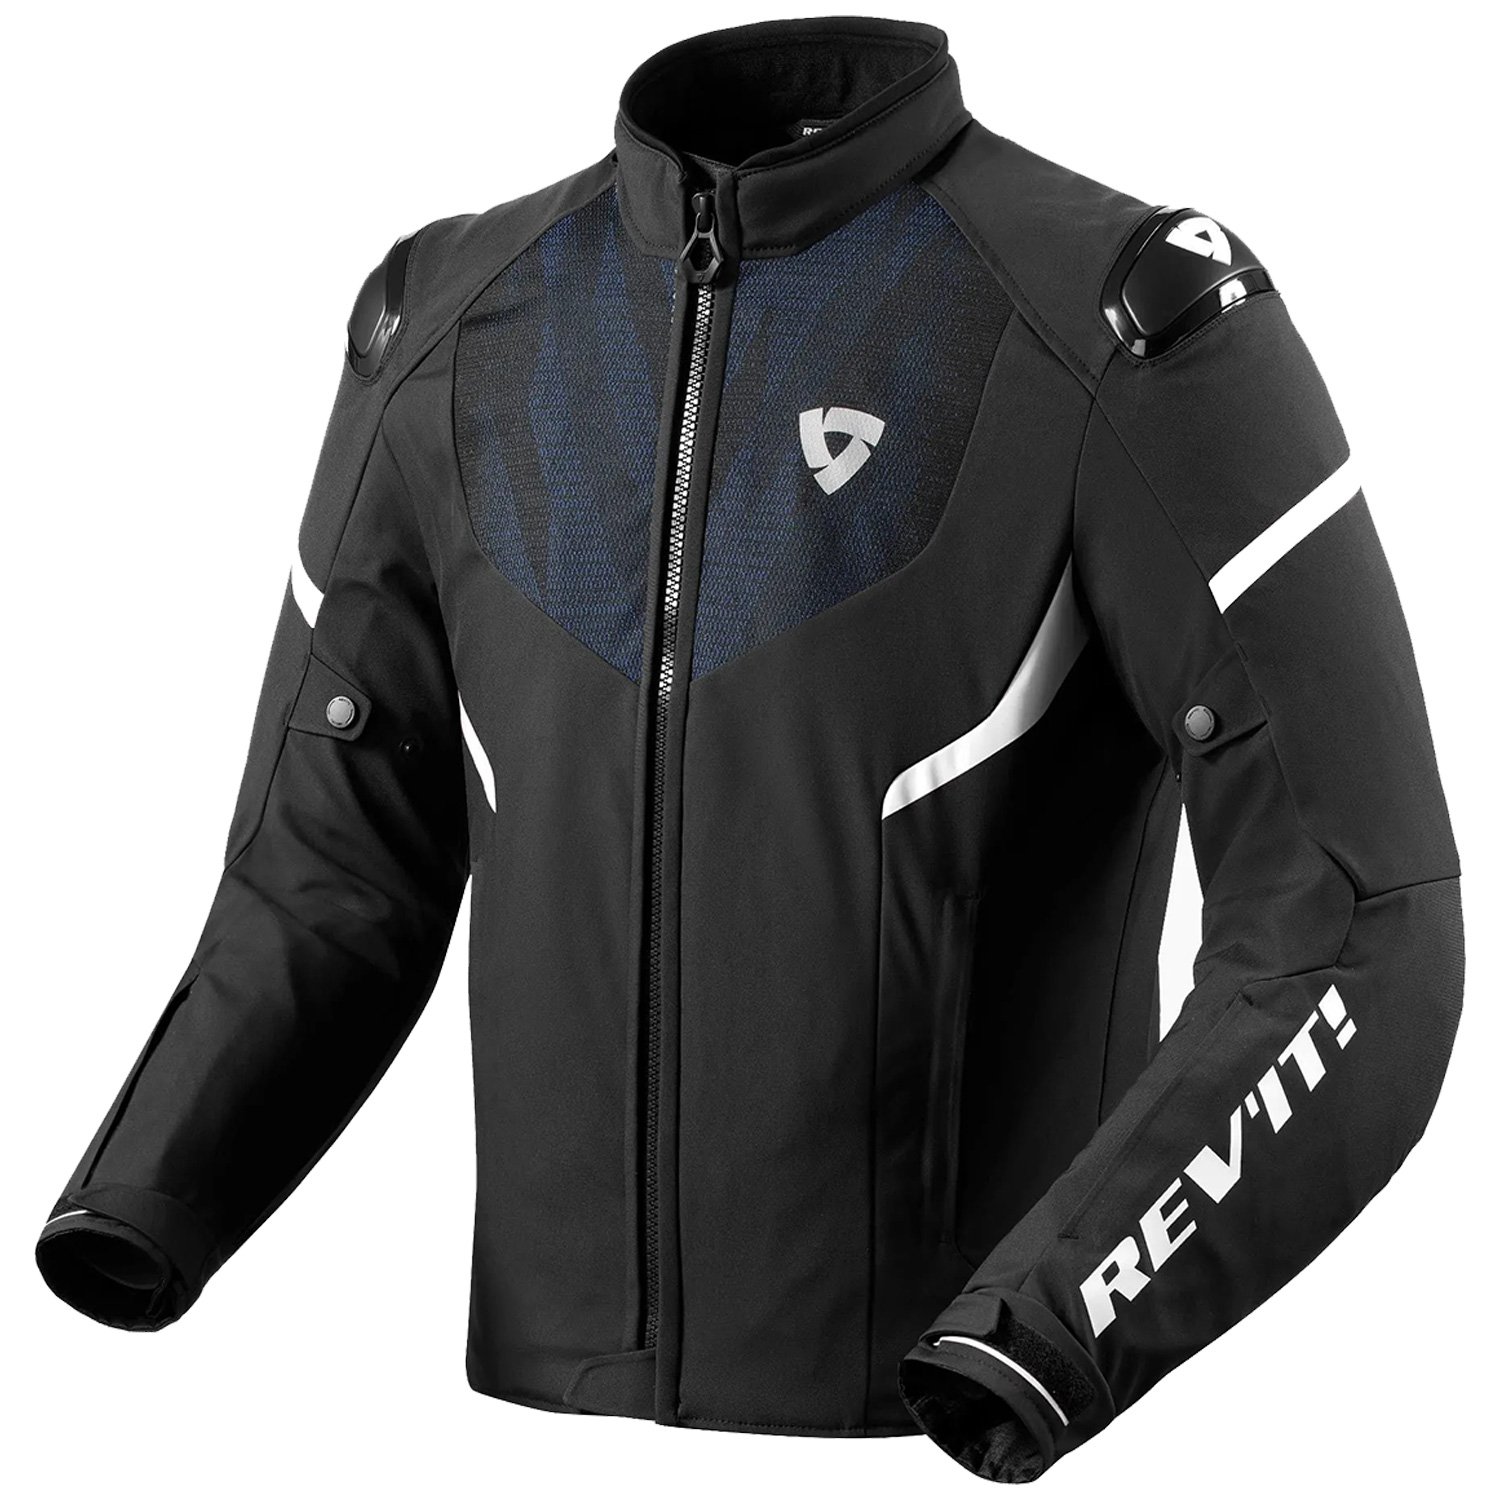 Image of REV'IT! Hyperspeed 2 H2O Jacket Black Blue Size S ID 8700001367288